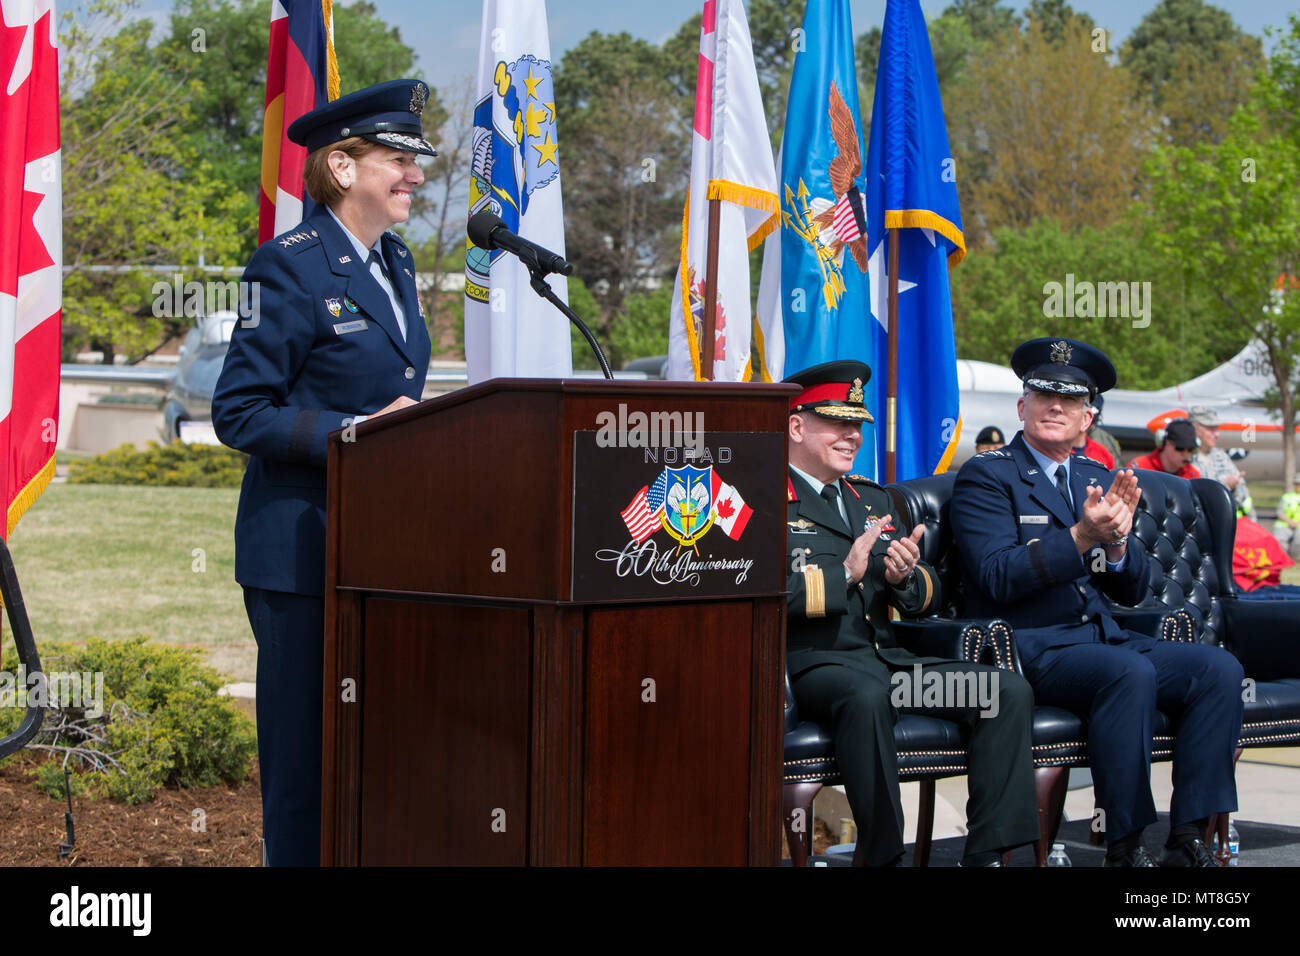 U.S. Air Force General Lori Robinson, Commander of the North American Aerospace Defense Command and U.S. Northern Command speaks during the NORAD 60th Anniversary Ceremony on Peterson Air Force Base Colorado, May 12. The ceremony and static display of various NORAD aircraft was the culmination of a three-day event, which included a media tour of Cheyenne Mountain Air Force Station, the dedication of a cairn outside the commands’ headquarters building memorializing the Canadians who have passed away while serving NORAD, and a fly over in missing-man formation performed by the Royal Canadian Air Stock Photo